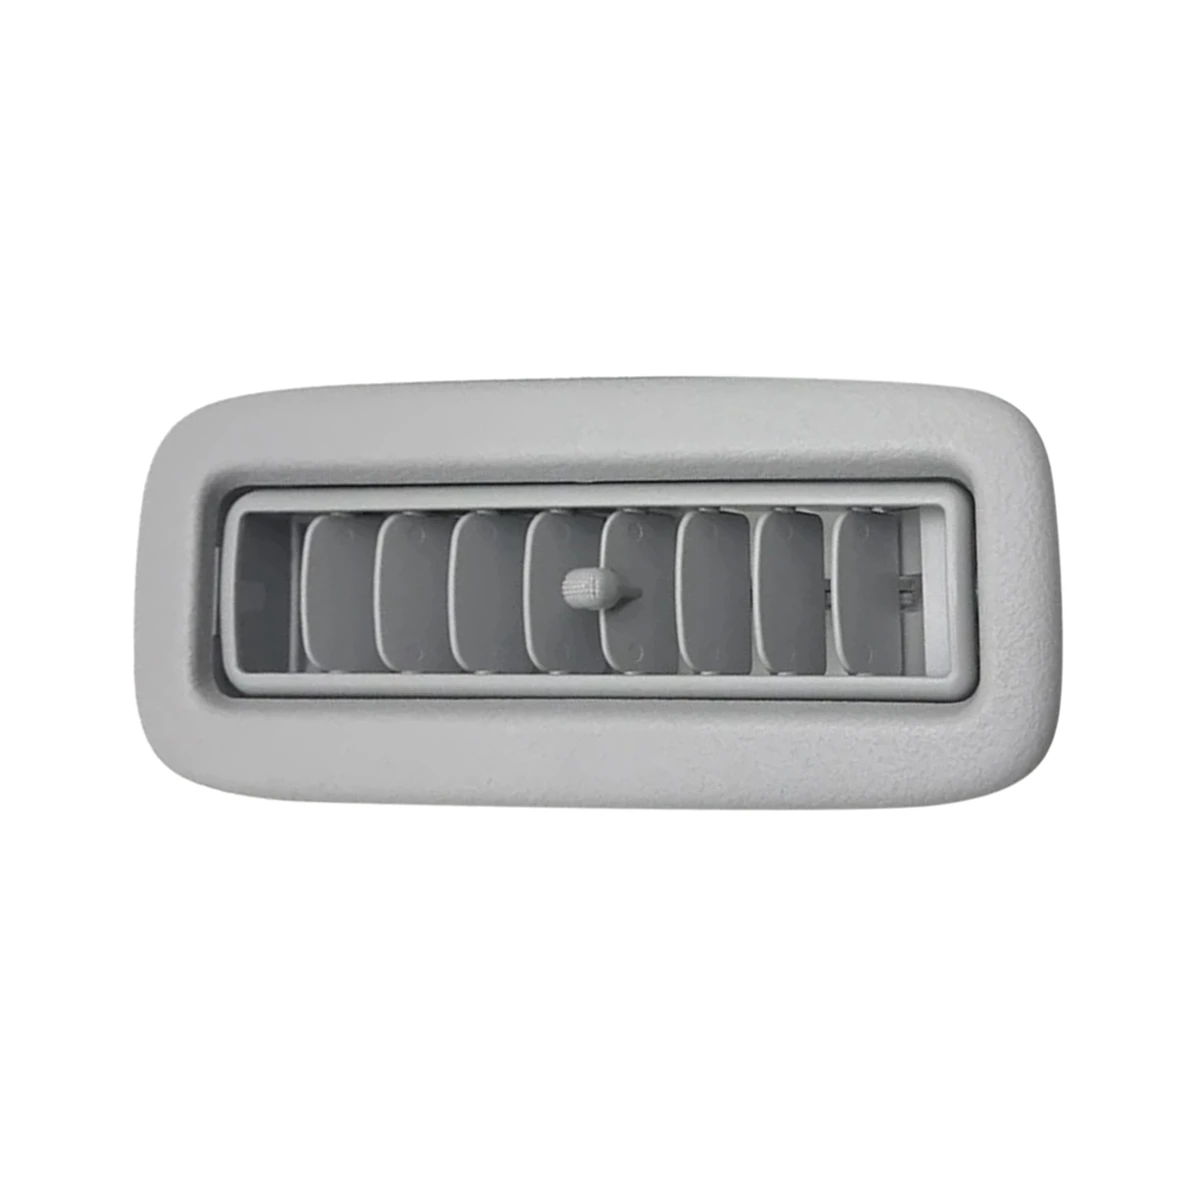 

Gray Car Roof Top Side Air Conditioning Vent A/C Panel Grille Cover for Mitsubishi Pajero V93 V97 Montero V95 V98 V87